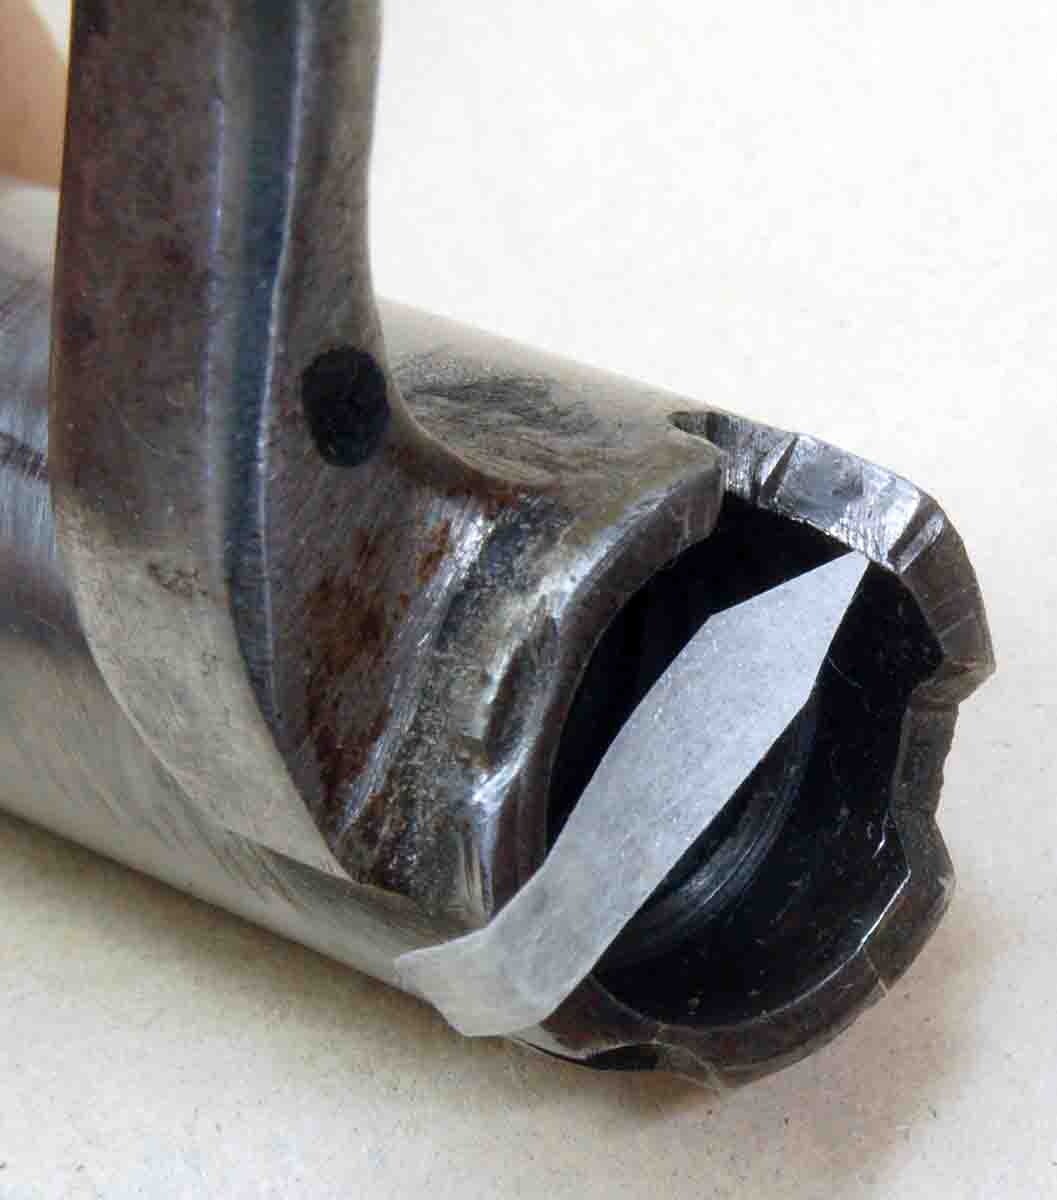 Shown is the galled cocking surface of an old military bolt annealed during alteration for low scope mounting.